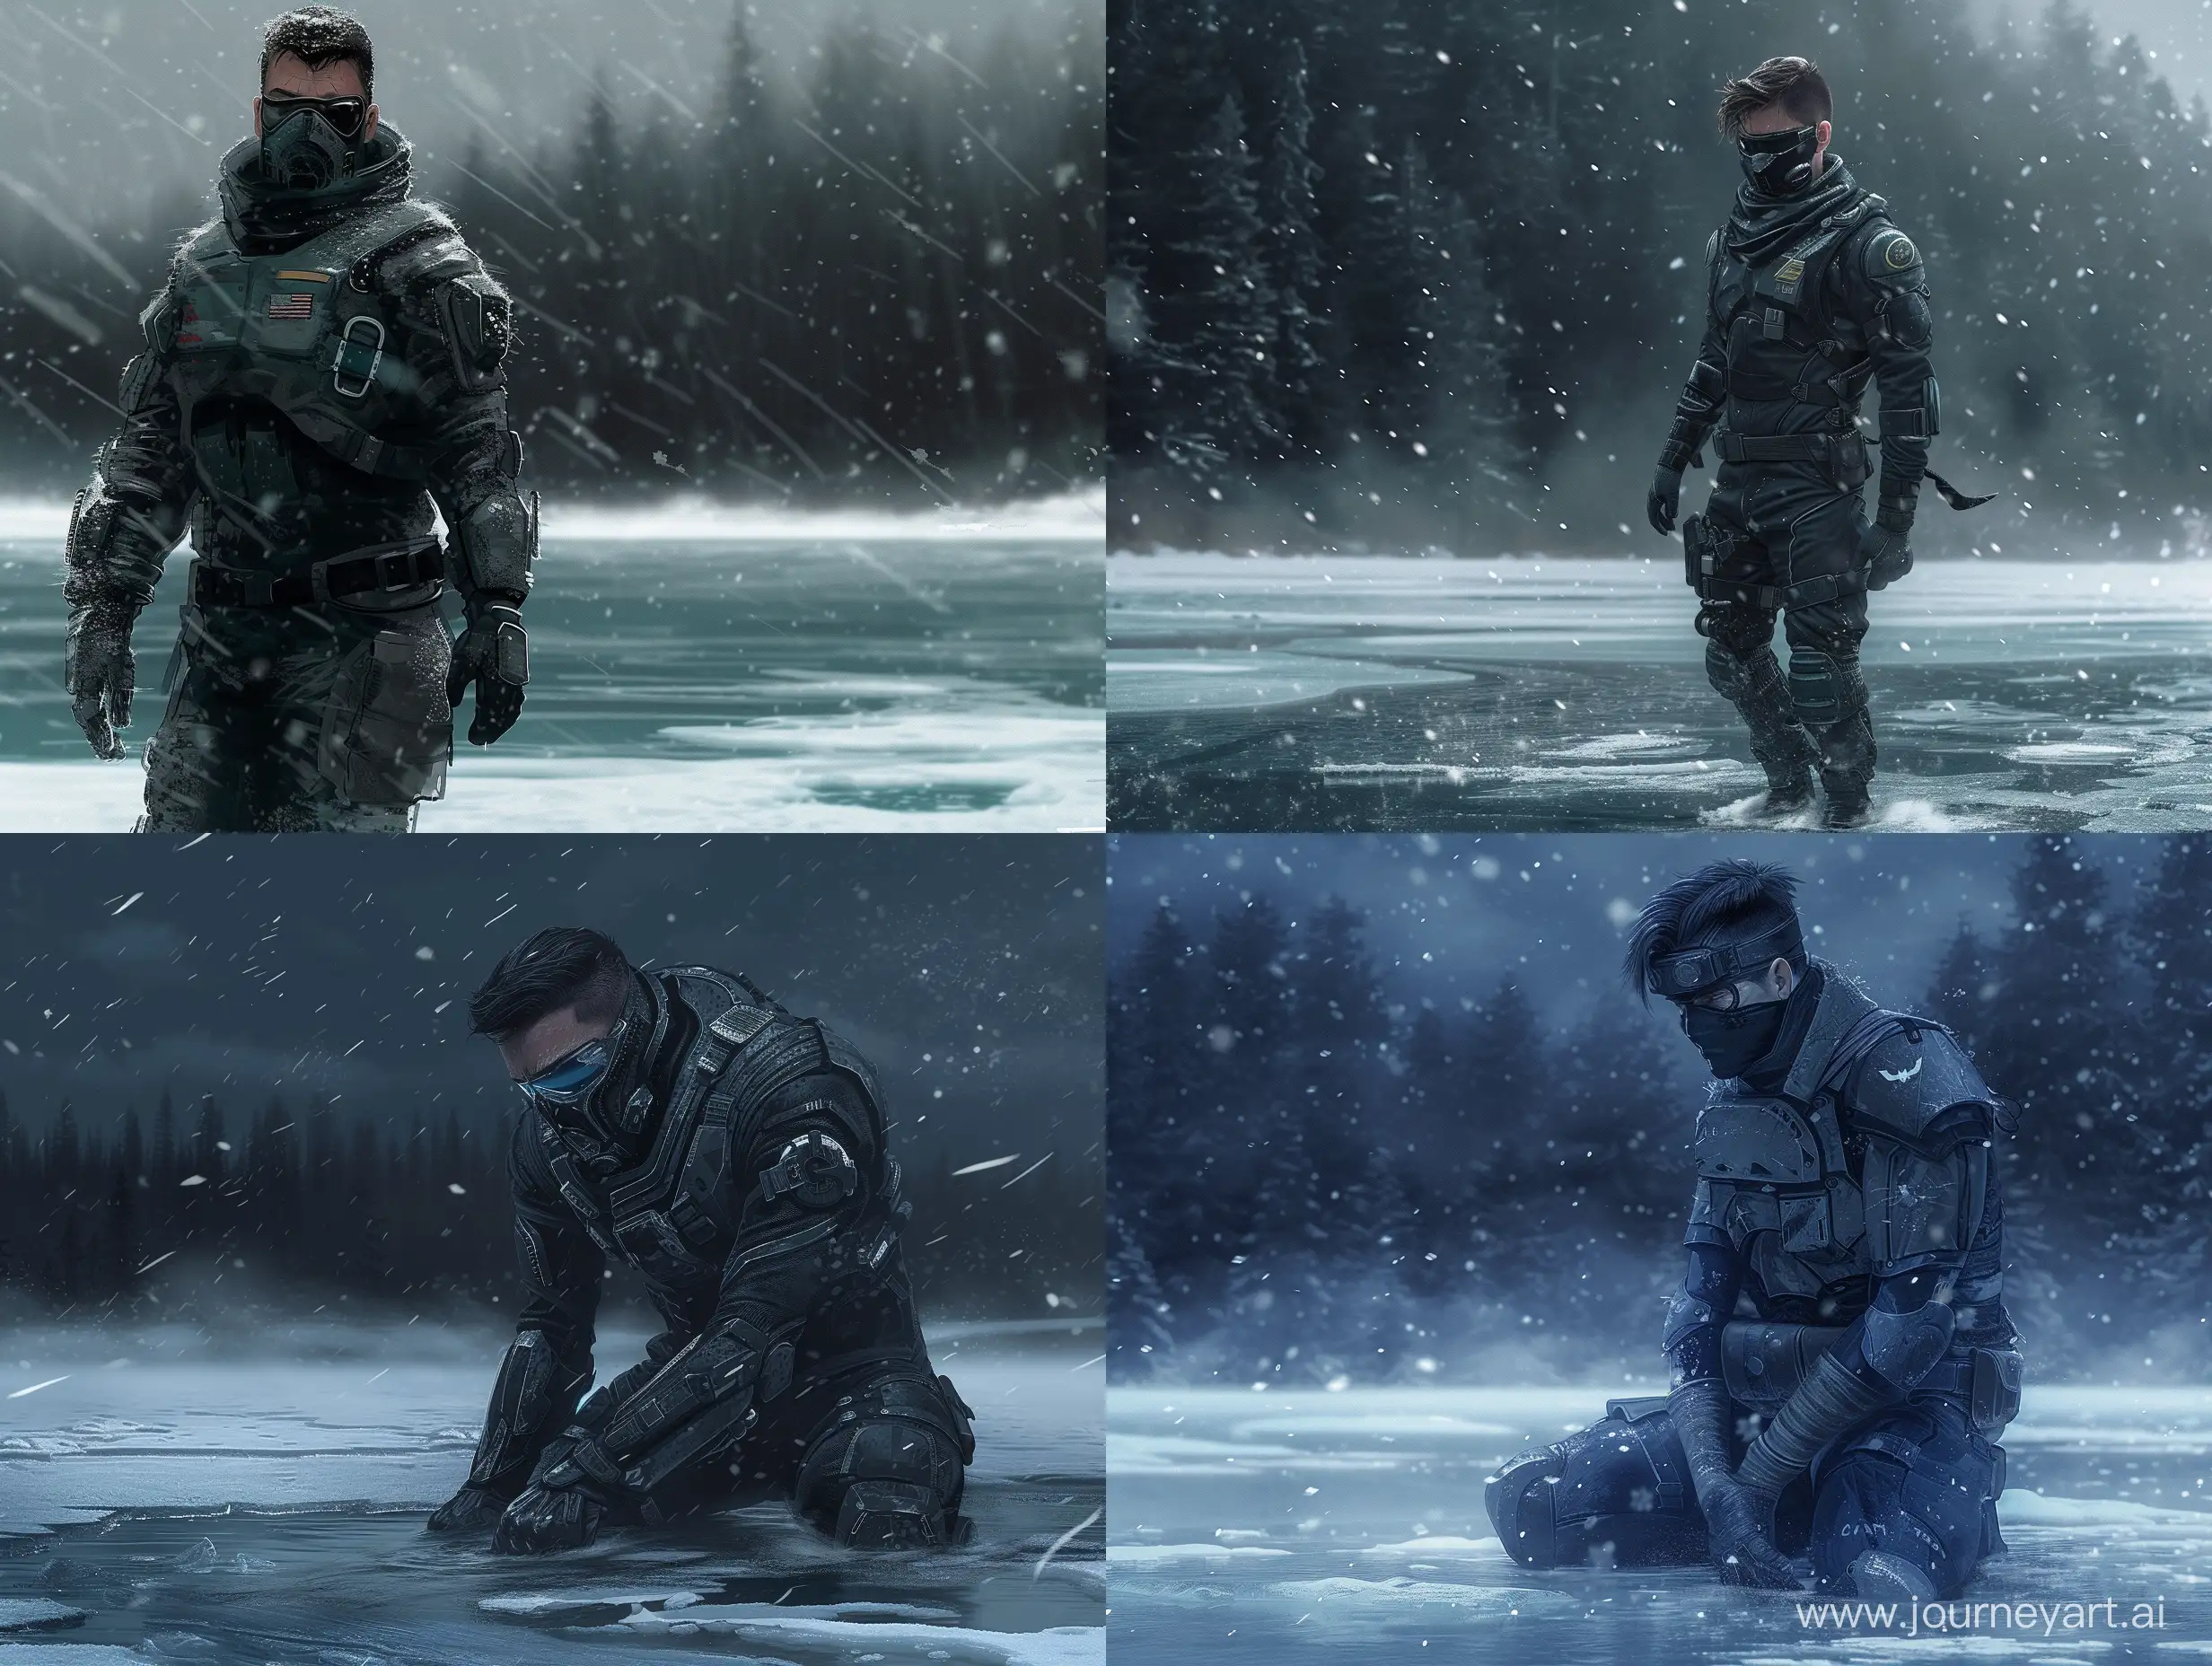 SciFi-Dark-Hunter-on-Icy-Lake-with-Forest-Background